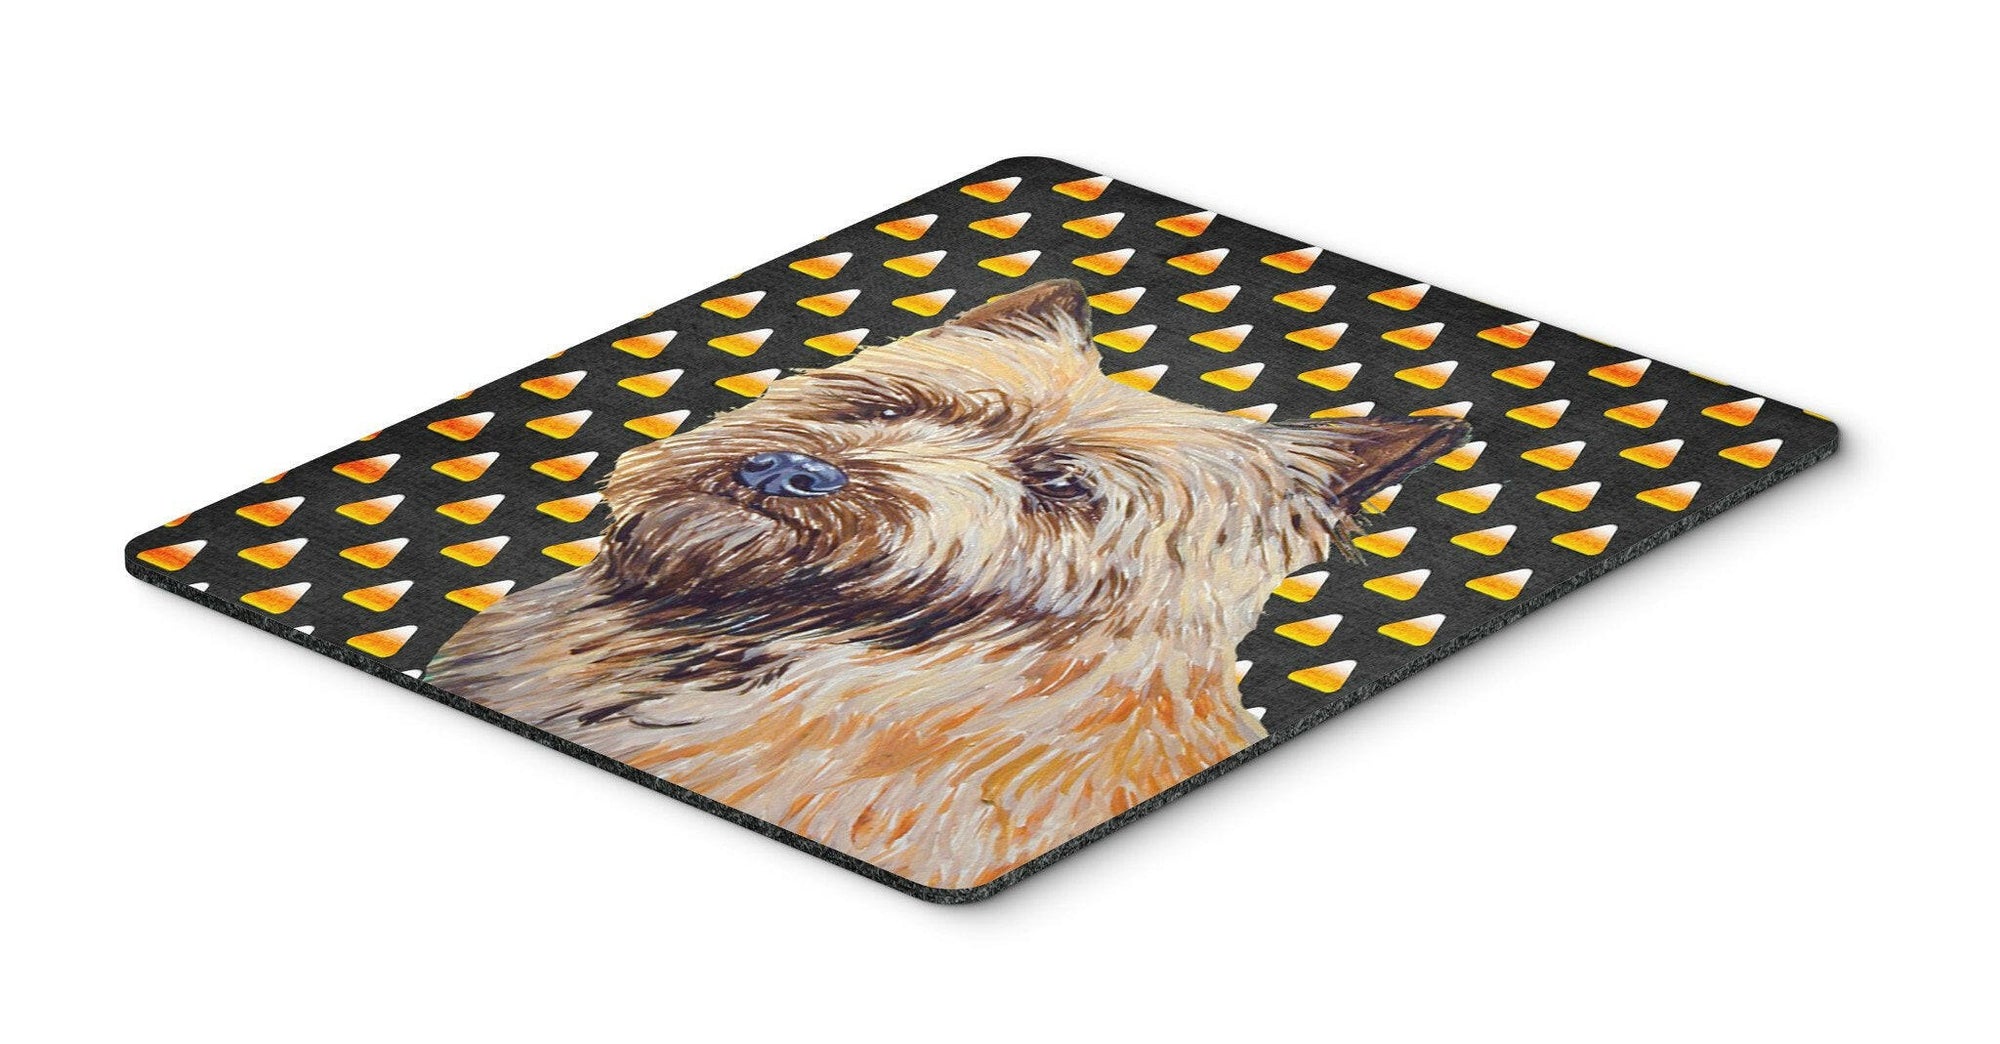 Cairn Terrier Candy Corn Halloween Portrait Mouse Pad, Hot Pad or Trivet by Caroline's Treasures